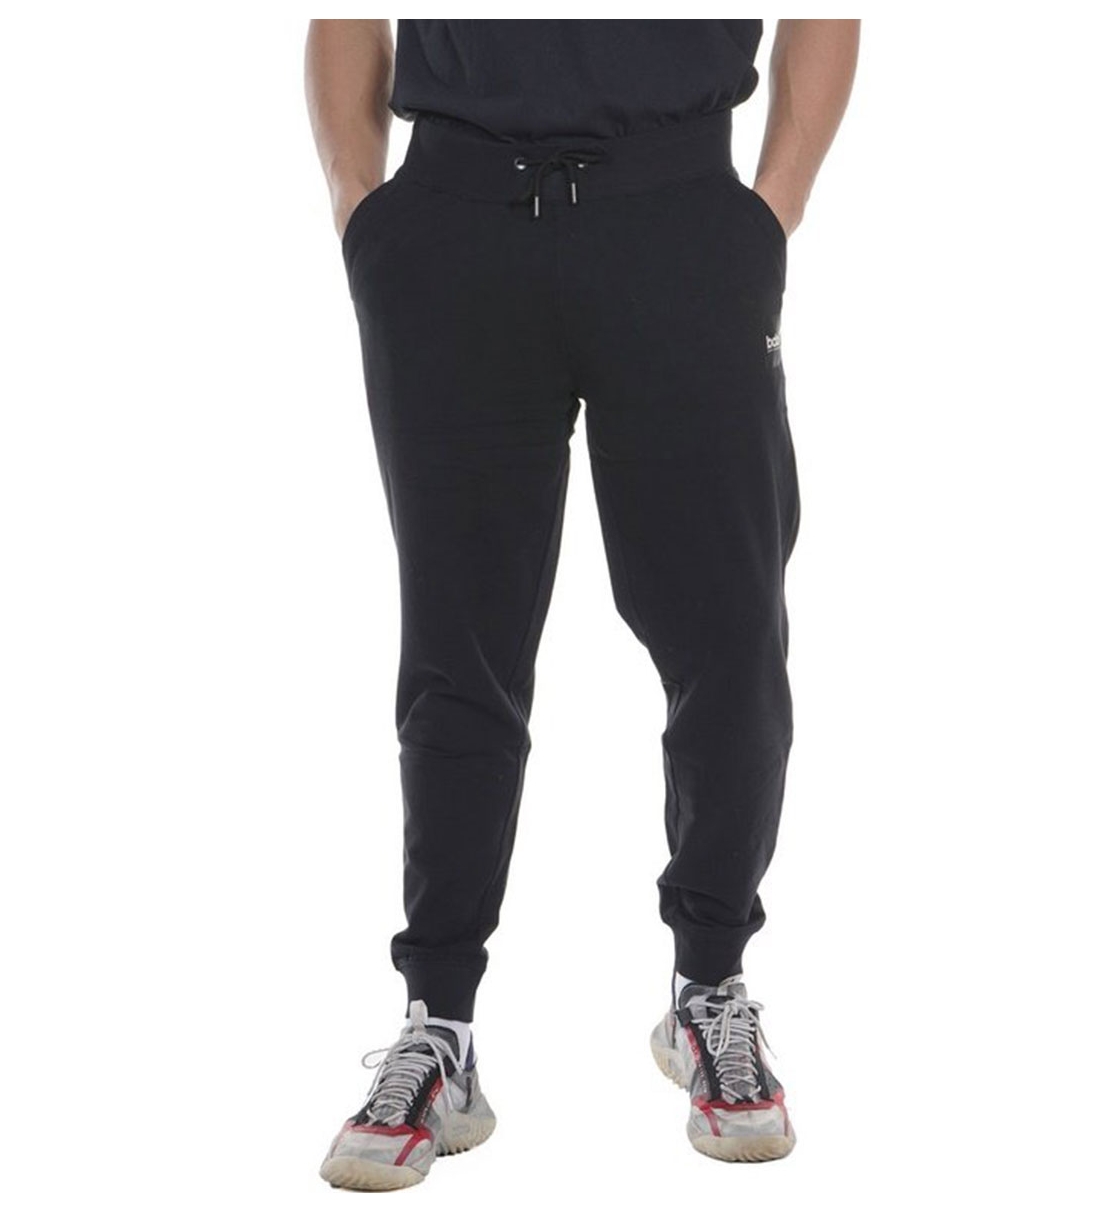 Body Action Ss22 Men'S Training Sport Joggers